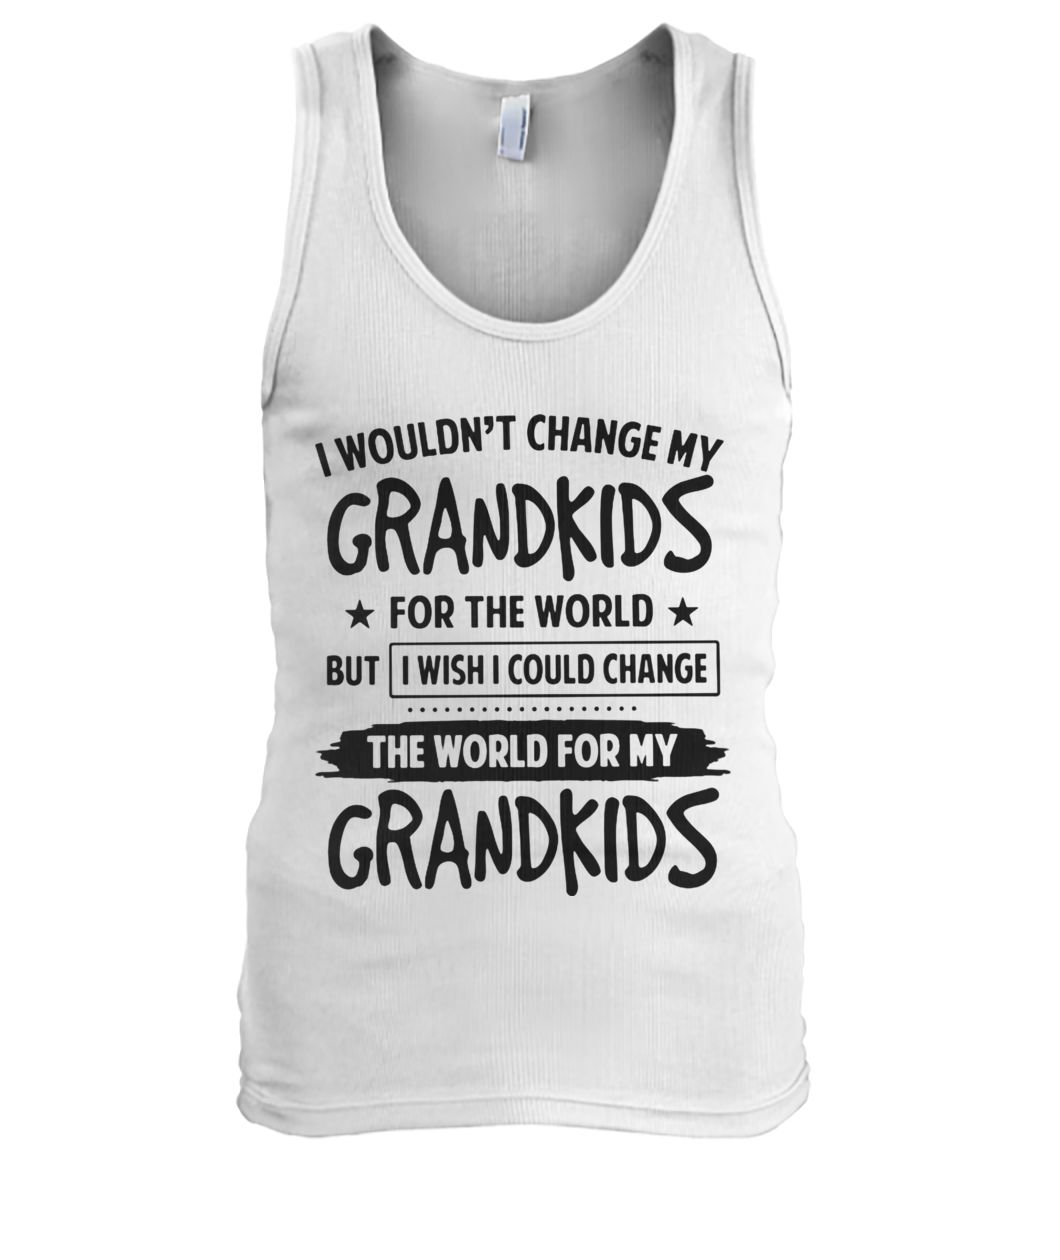 I wouldn’t change my grandkids for the world but I wish I could change the world for my grandkids men's tank top